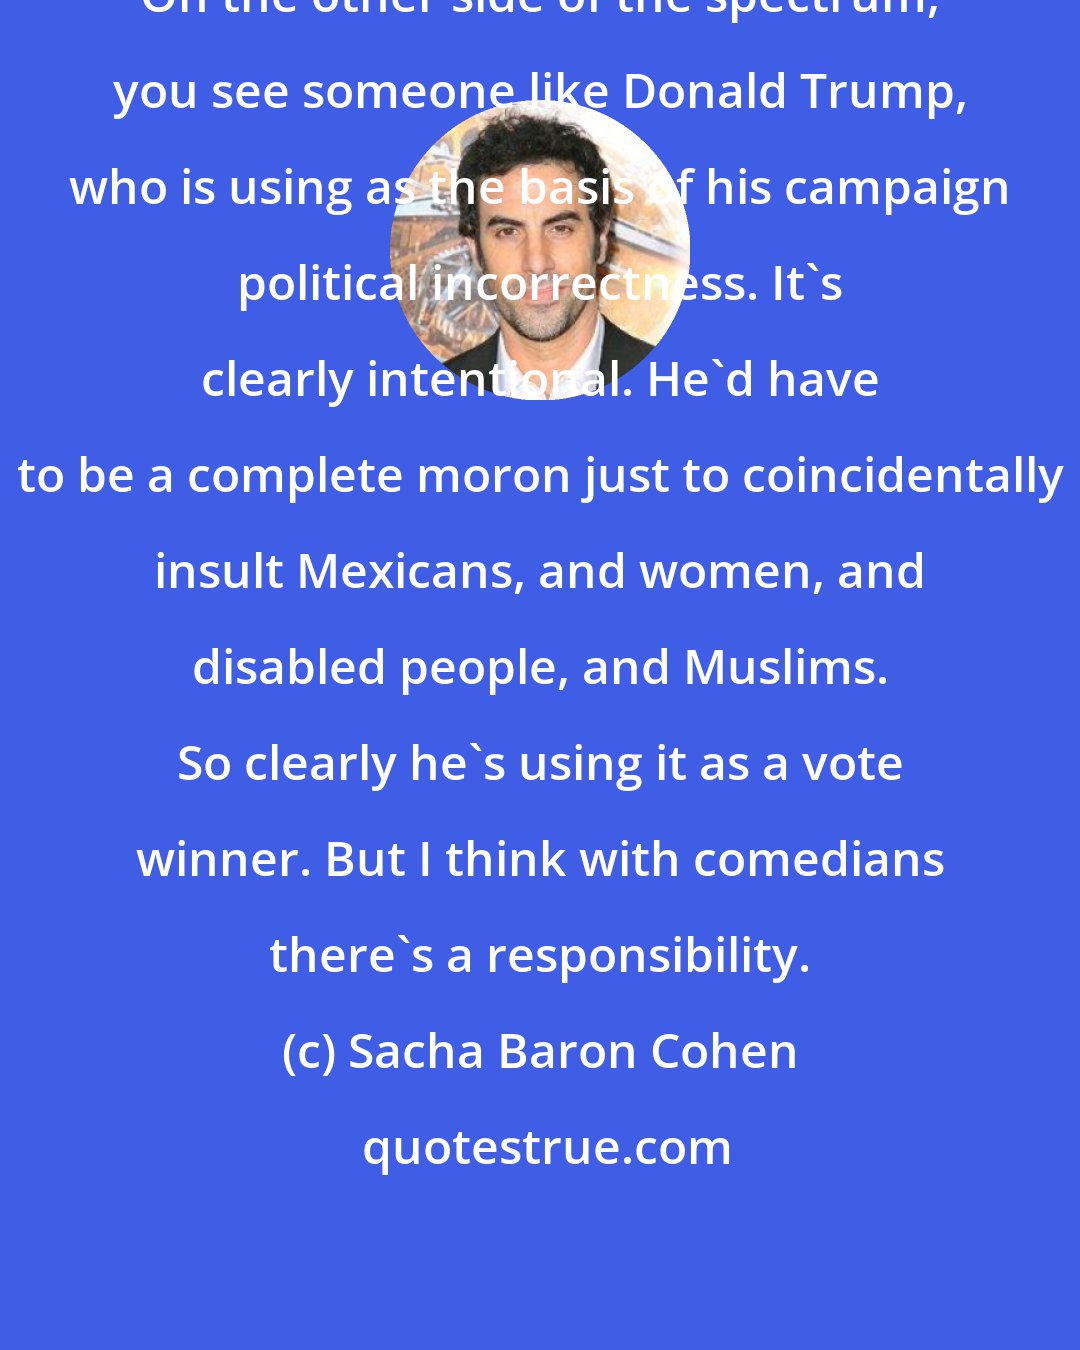 Sacha Baron Cohen: On the other side of the spectrum, you see someone like Donald Trump, who is using as the basis of his campaign political incorrectness. It's clearly intentional. He'd have to be a complete moron just to coincidentally insult Mexicans, and women, and disabled people, and Muslims. So clearly he's using it as a vote winner. But I think with comedians there's a responsibility.